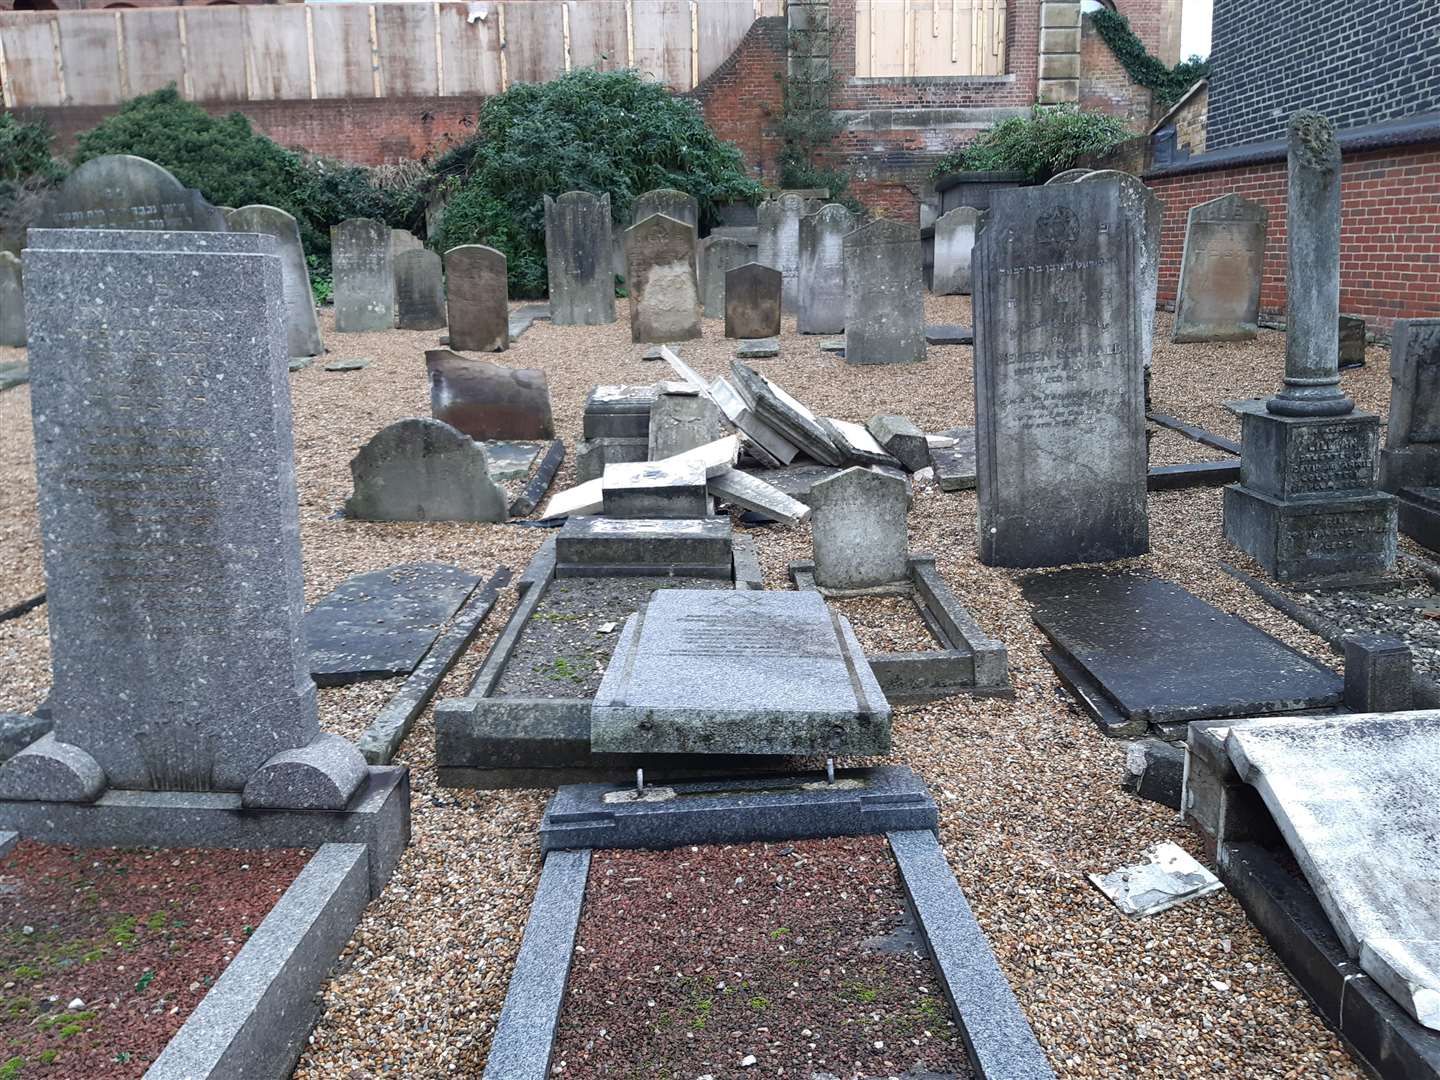 Headstones were vandalised at a Jewish Cemetery in Chatham, in the run up to Rosh Hashanah. (19281475)